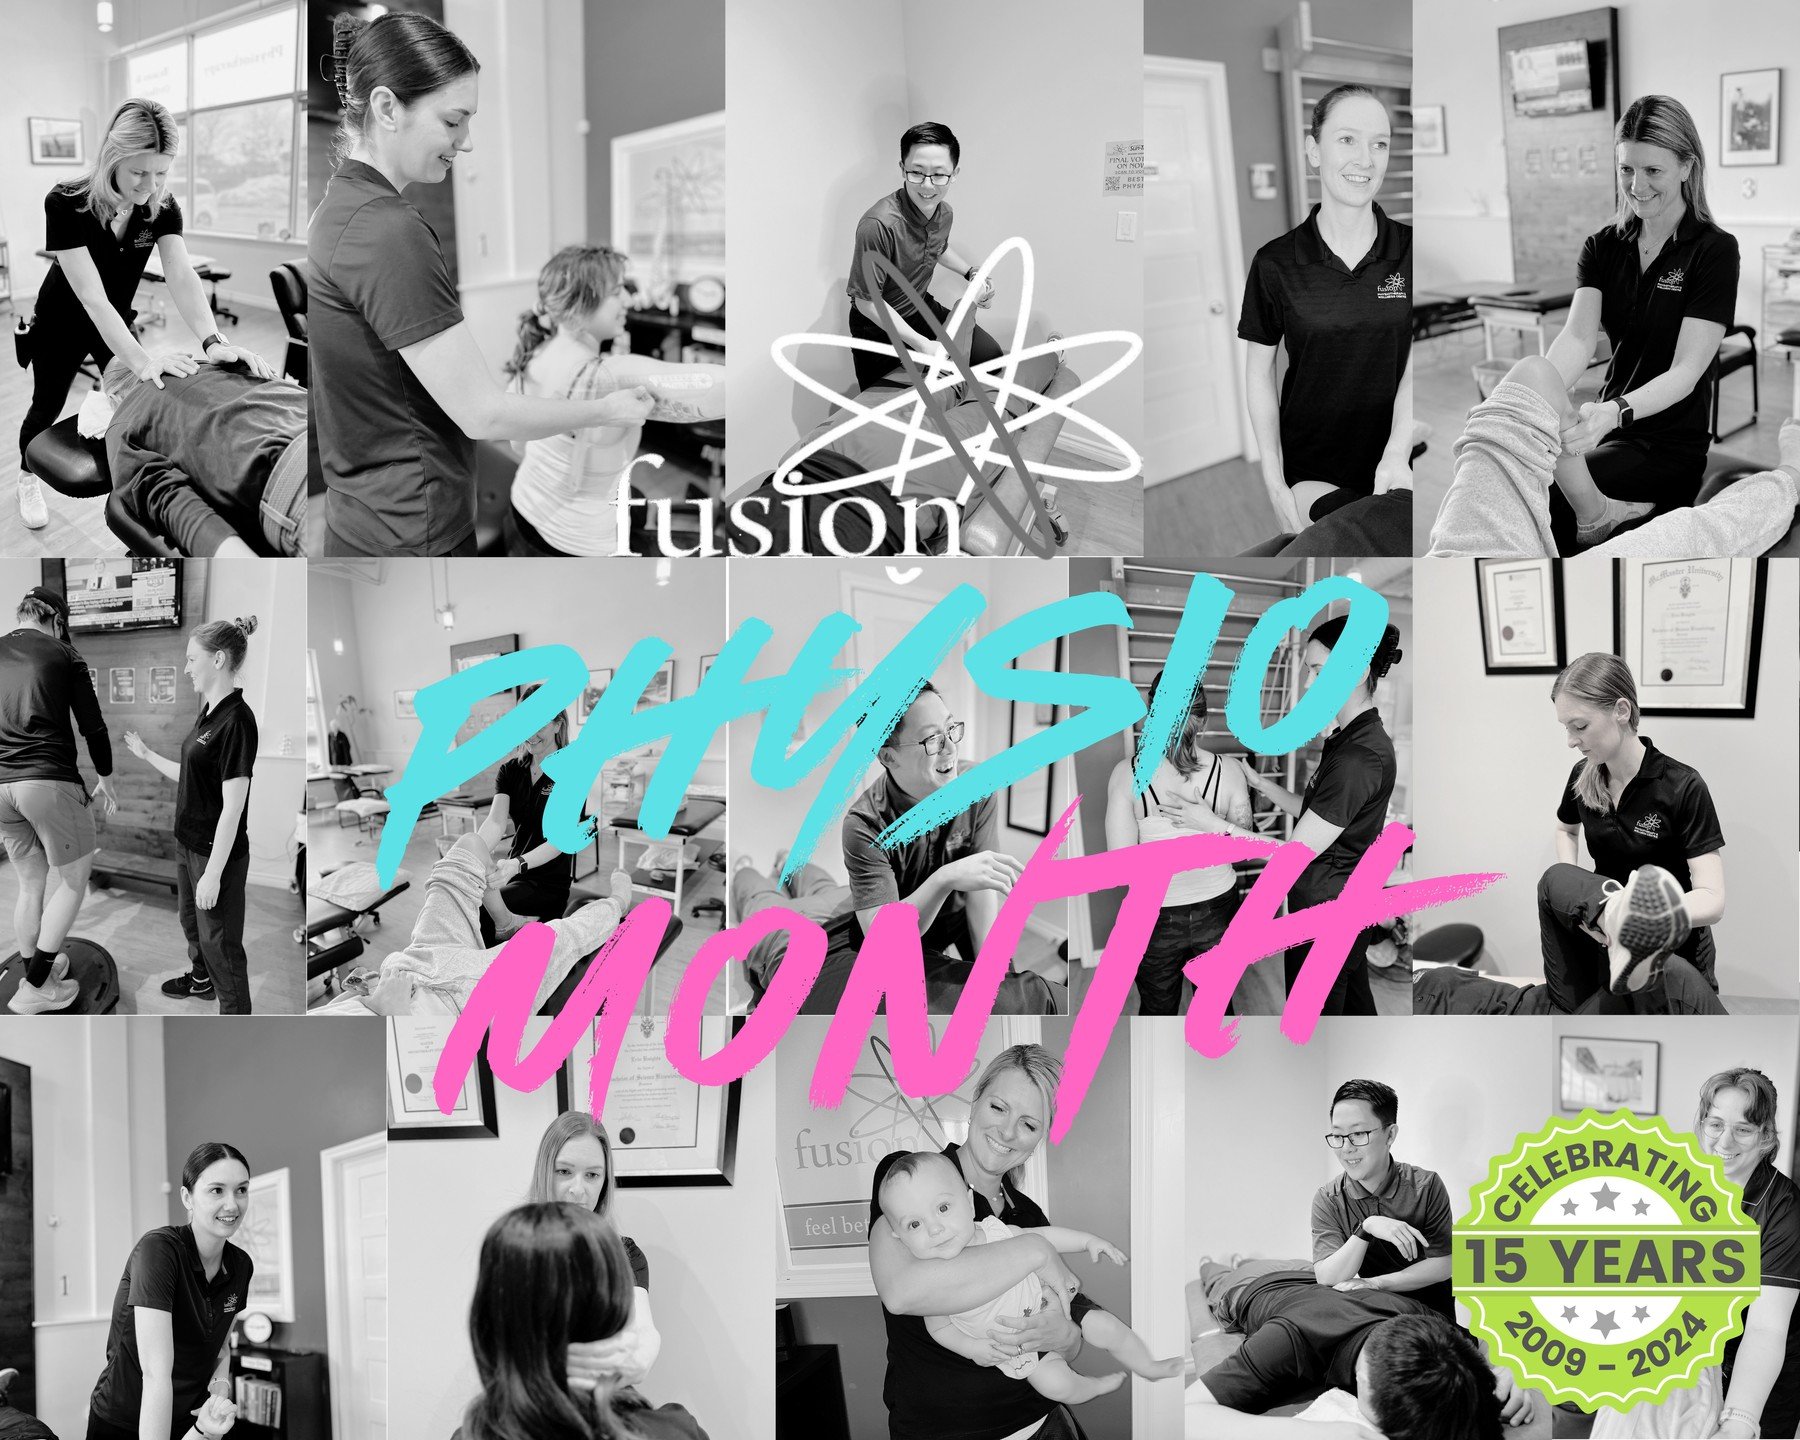 May is National Physiotherapy Month and we want to celebrate! Join us all month long as we highlight our amazing team of physios and the impact they have on our community. Plus, a special look back at our 15 years serving the community of Stouffville